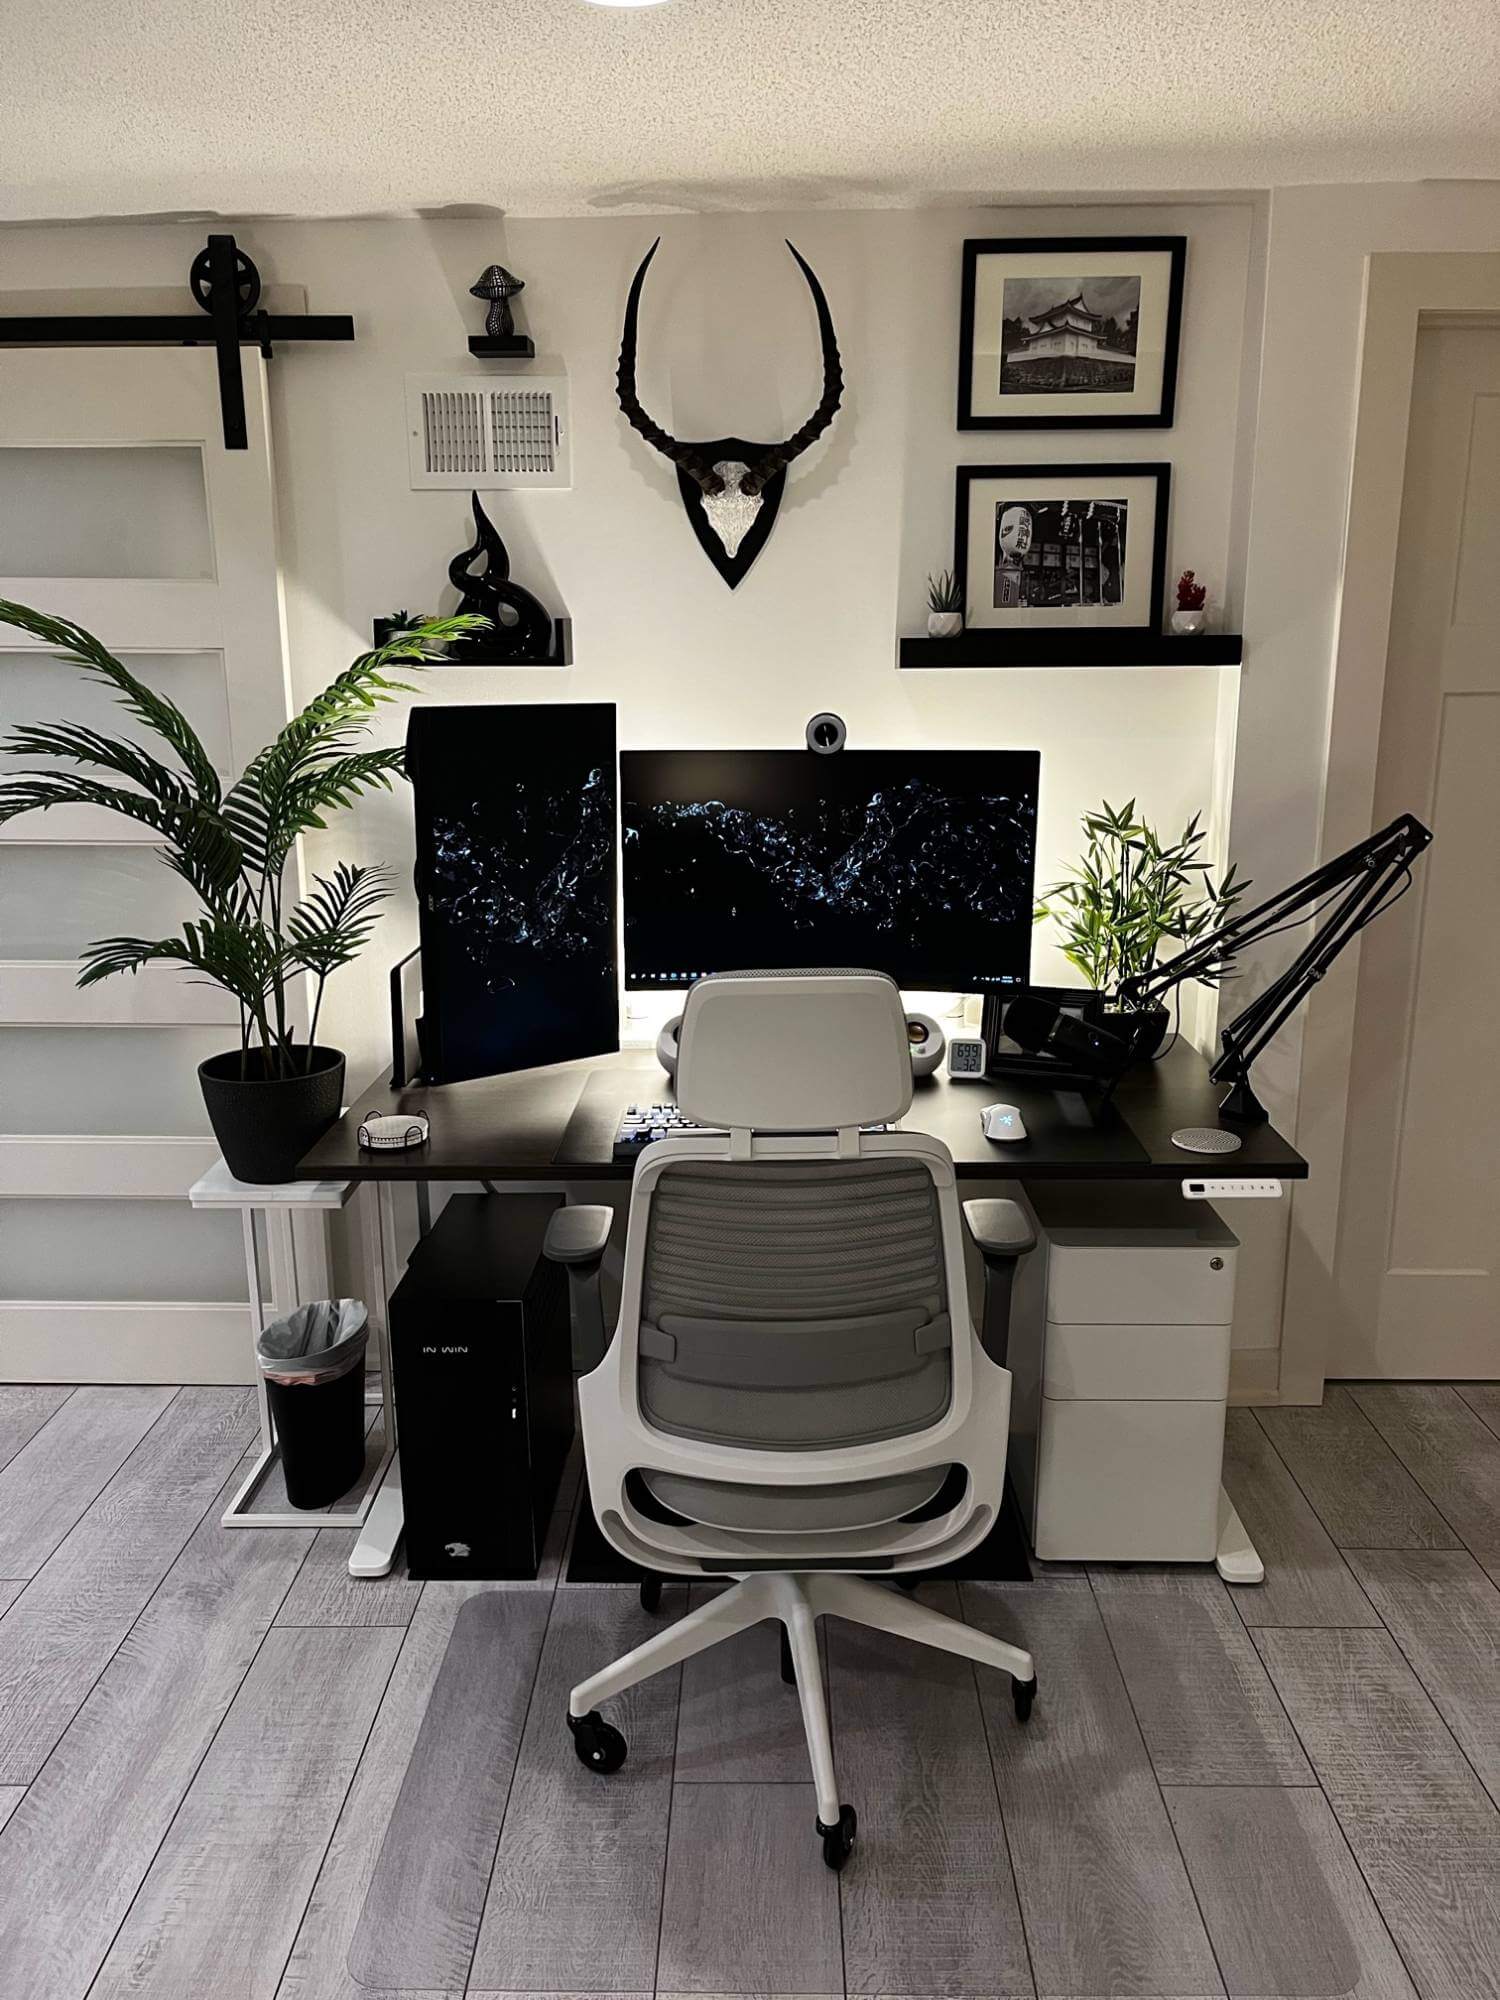 A minimalist dual-monitor workspace with an ergonomic chair, decorative plants, and framed artwork, all neatly arranged in a bright, contemporary room